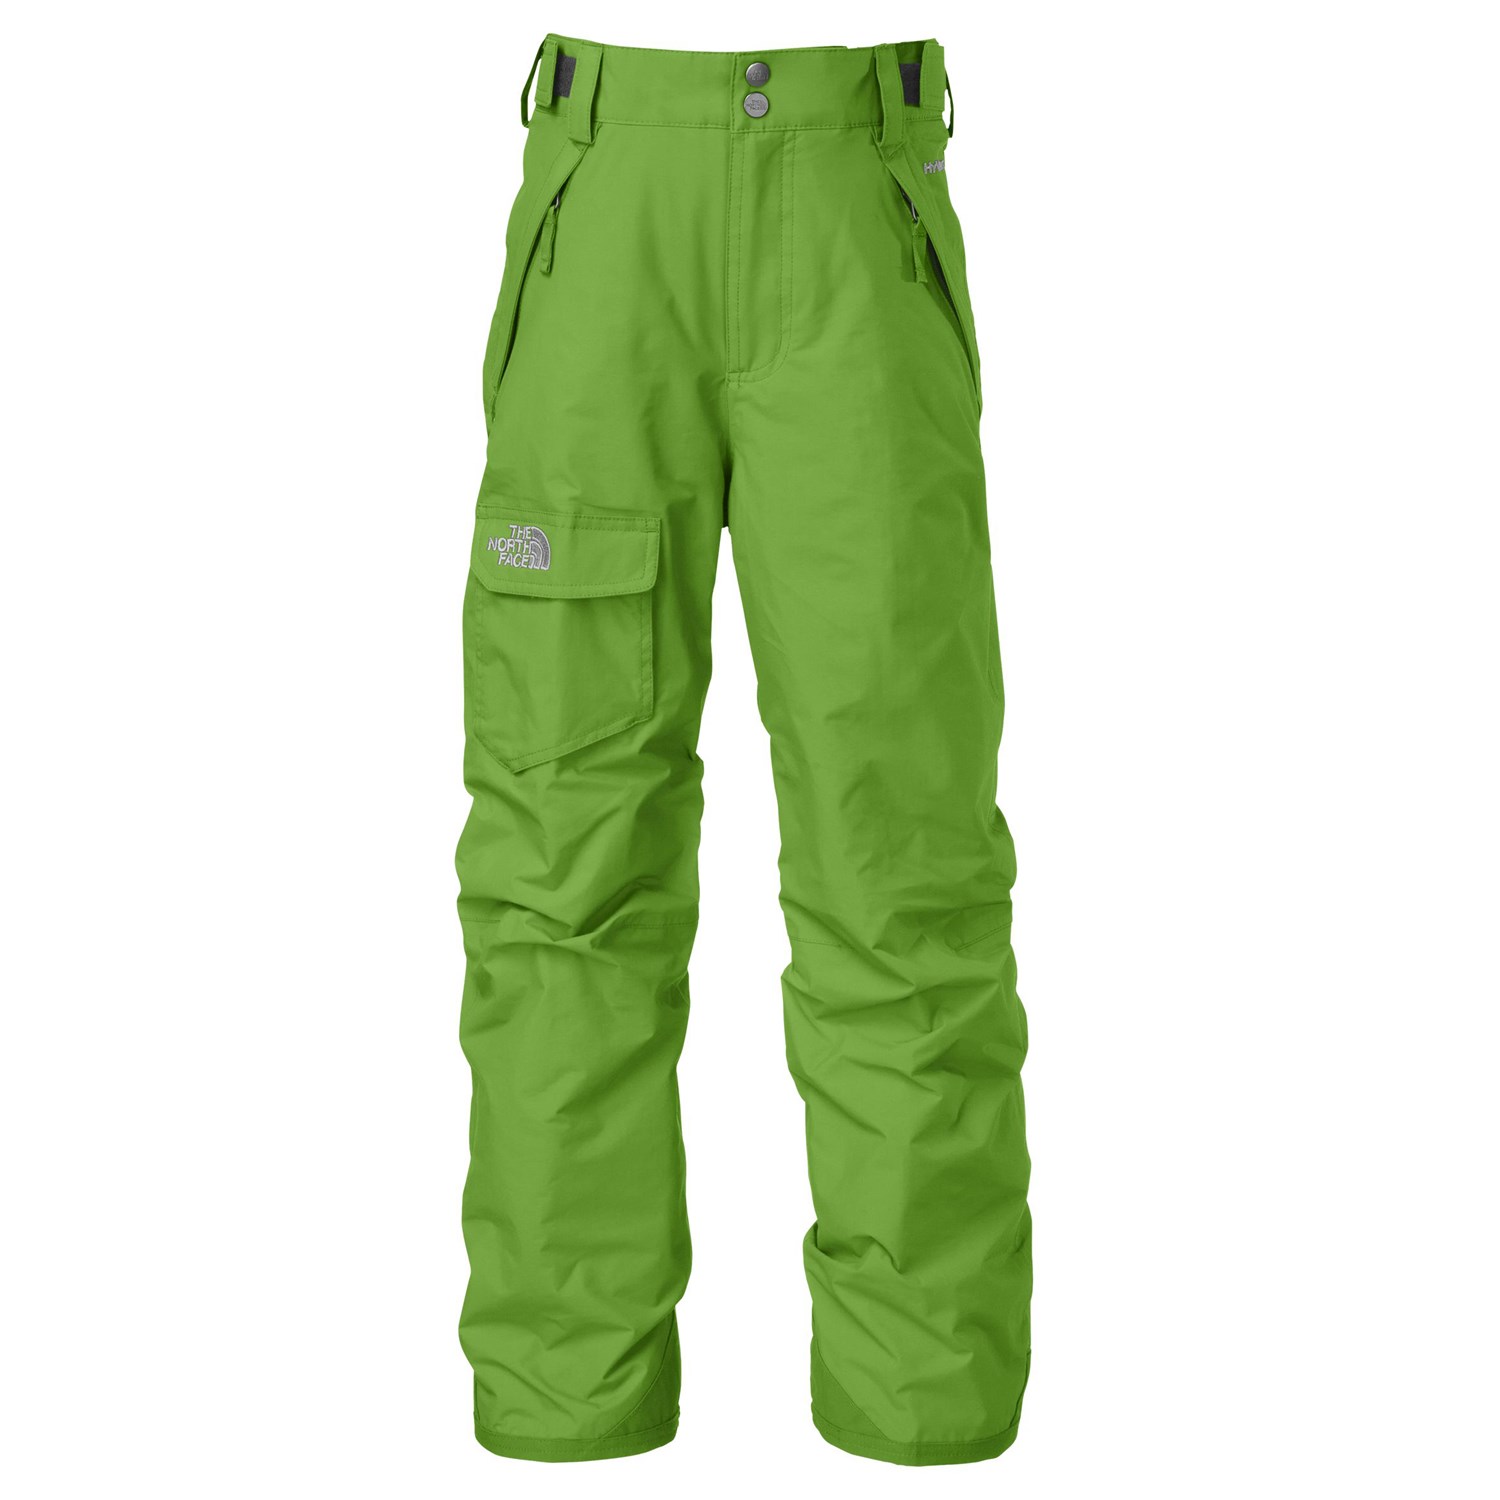 north face youth snow pants